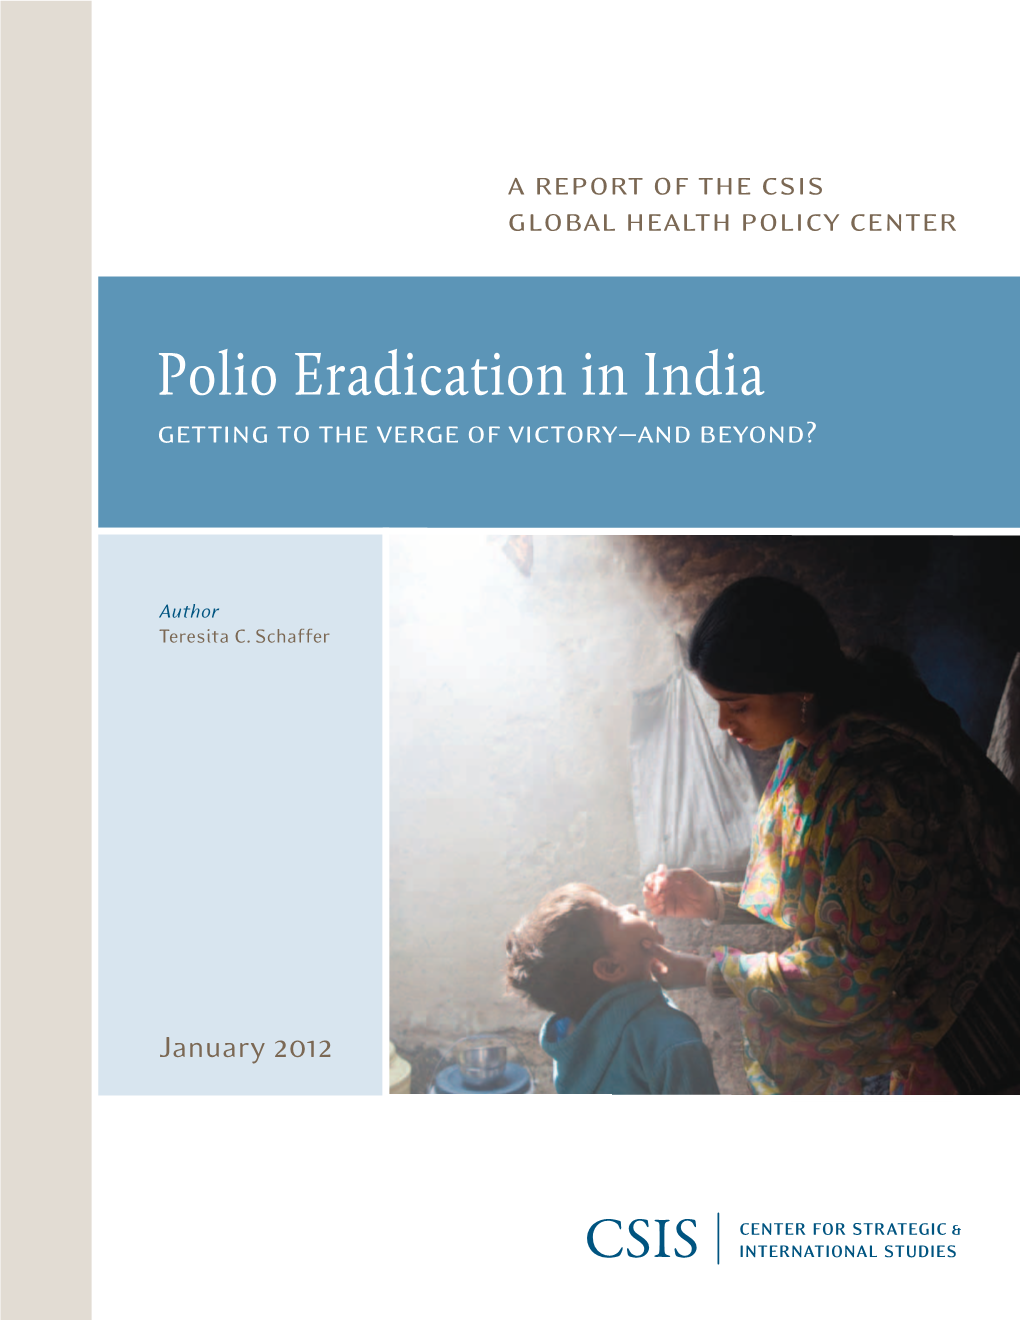 Polio Eradication in India Getting to the Verge of Victory—And Beyond?